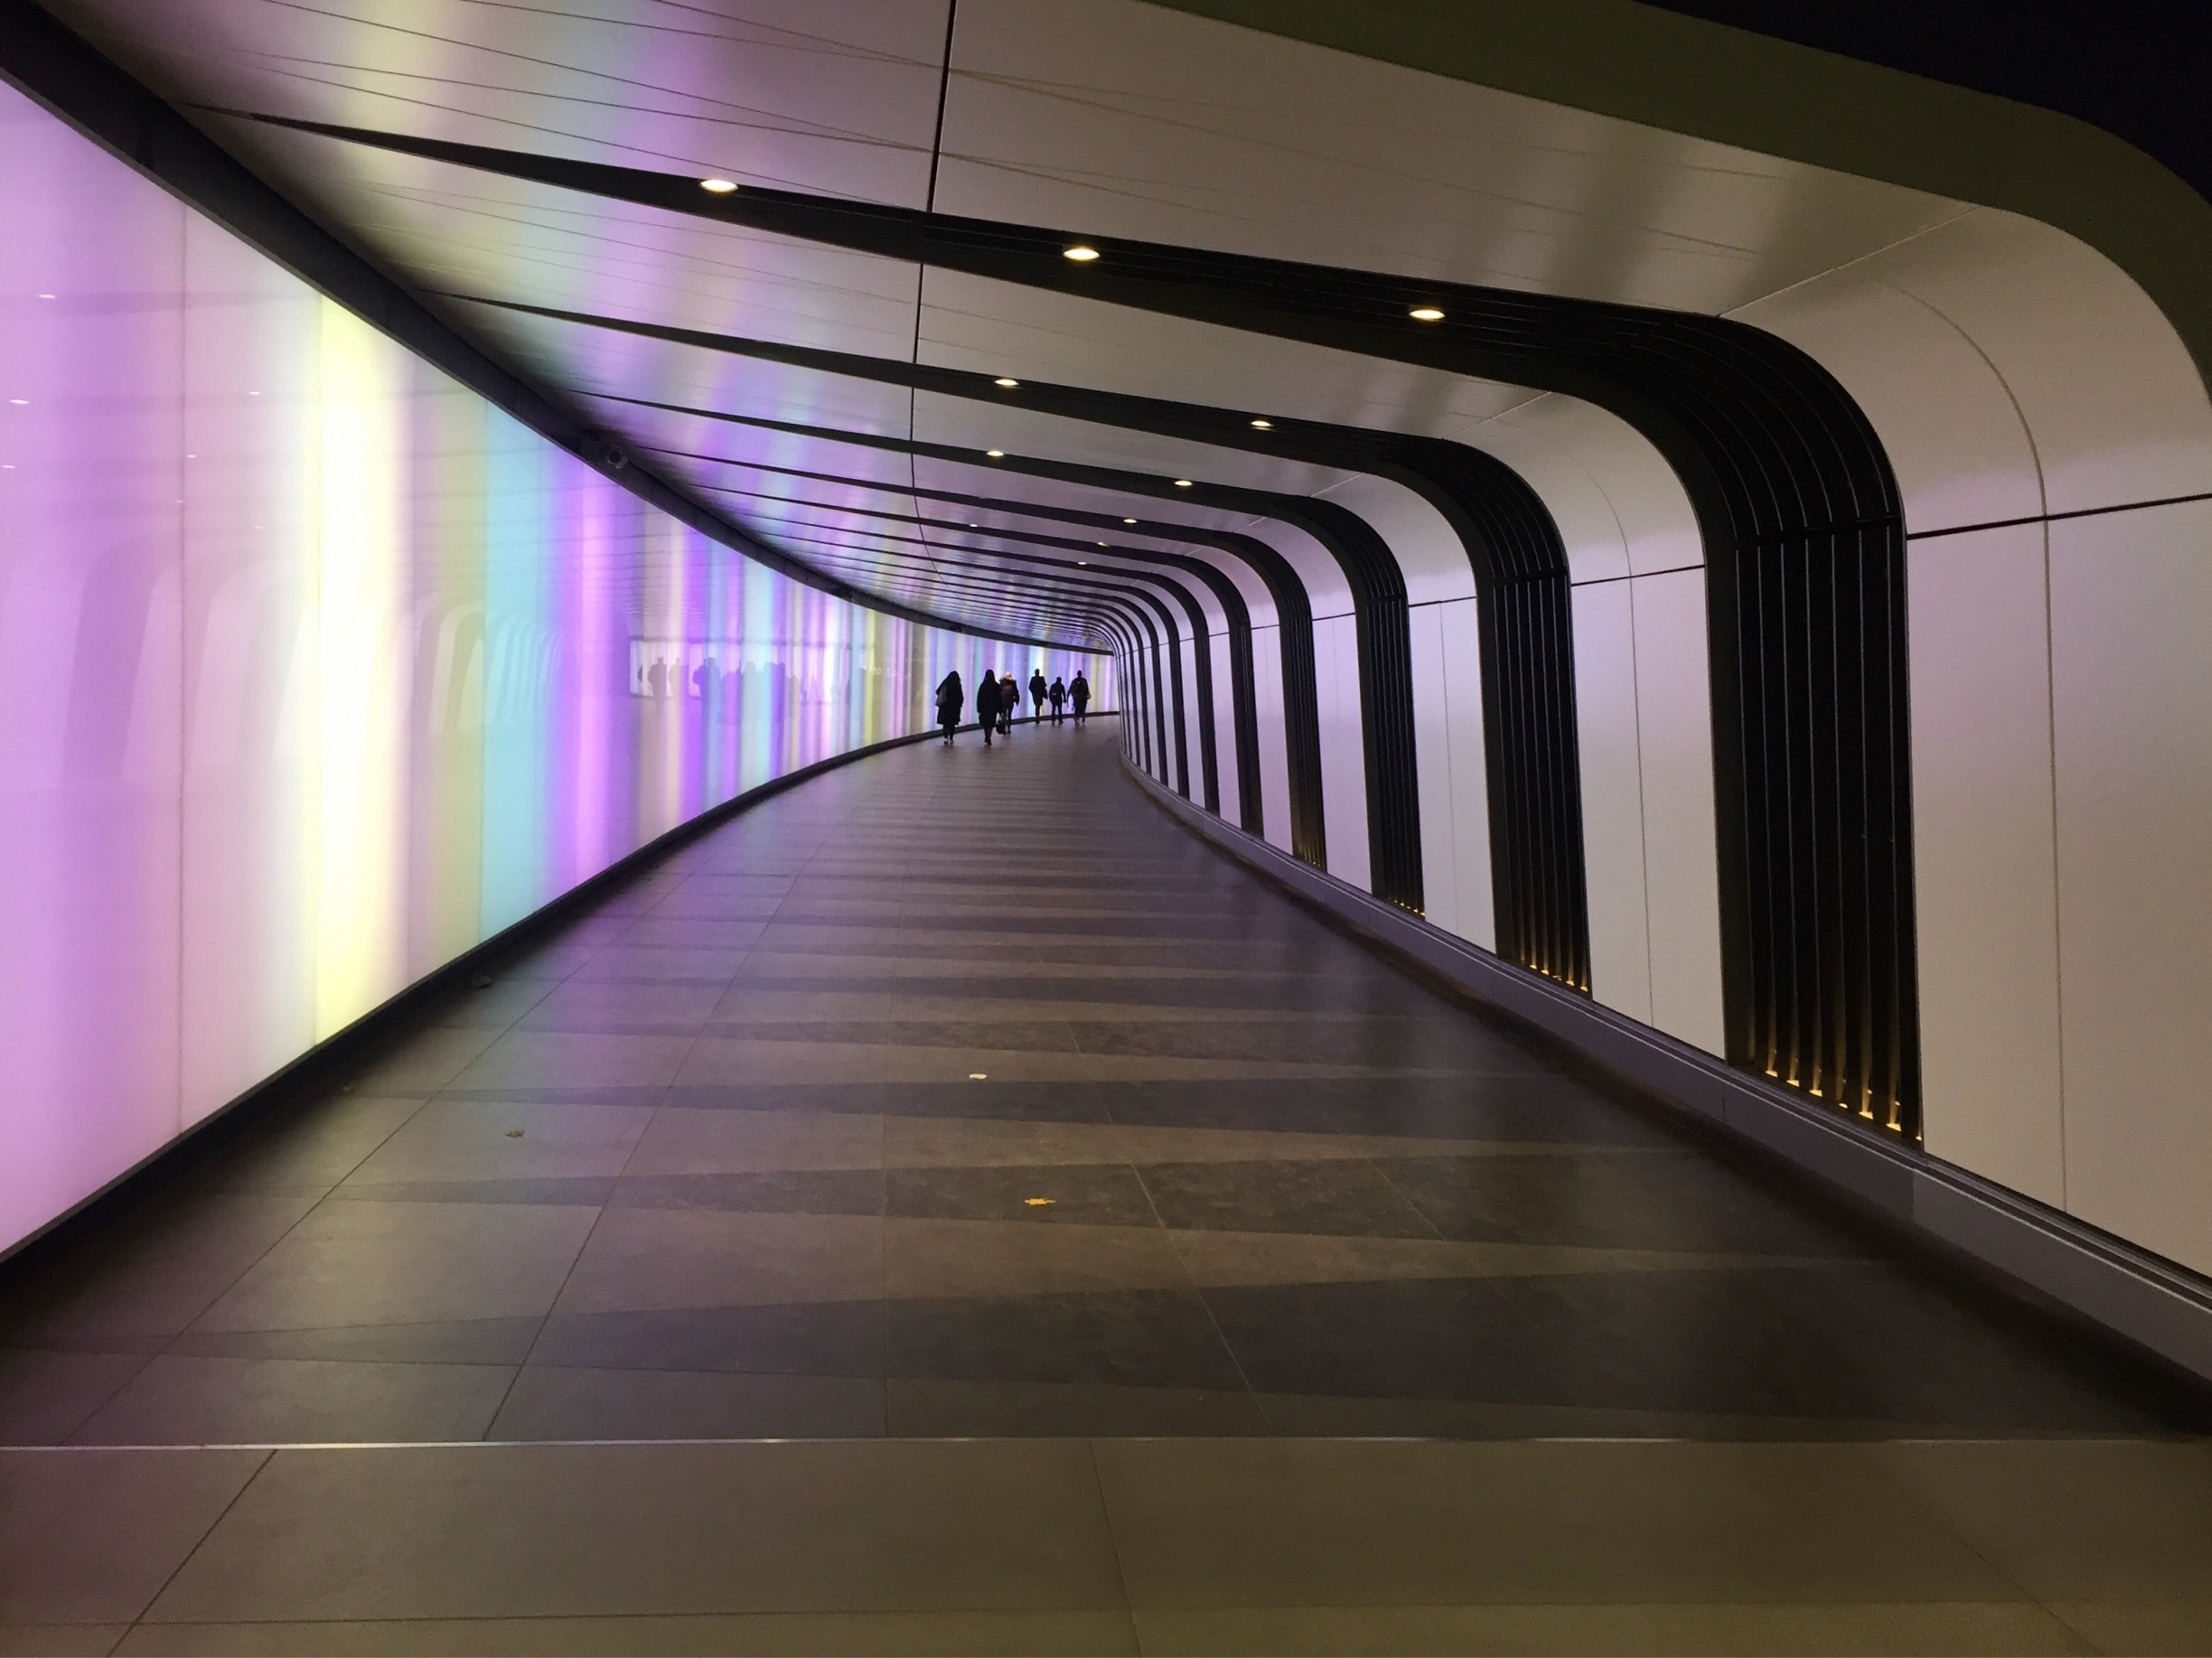 New tunnel in London. A very photogenic one 